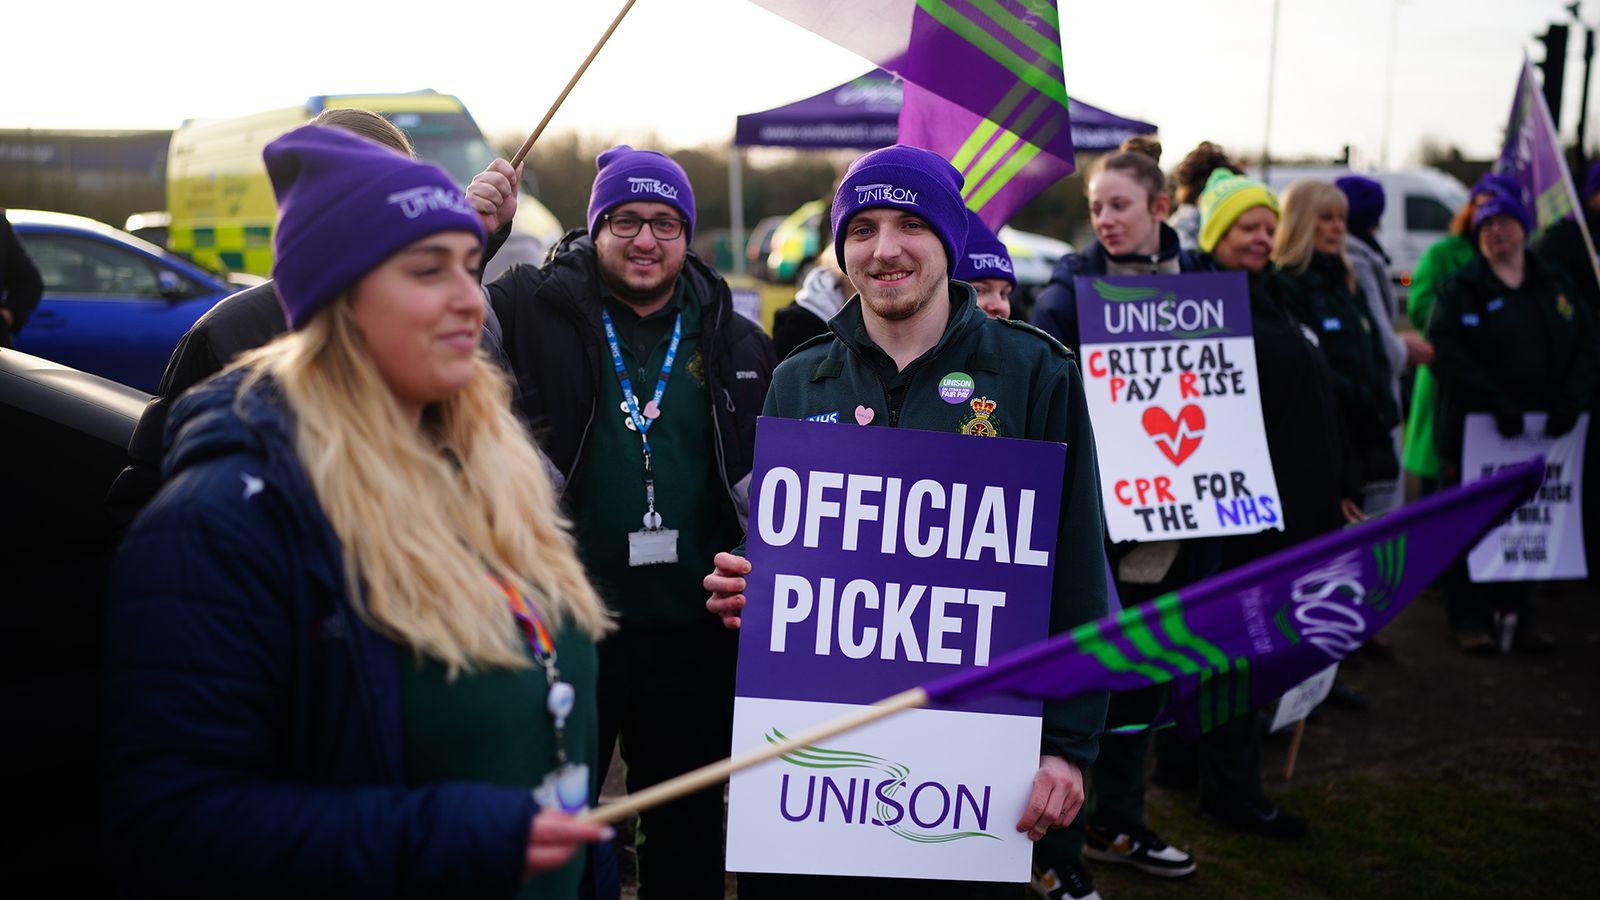 Fresh strikes by paramedics and university workers over pay and conditions